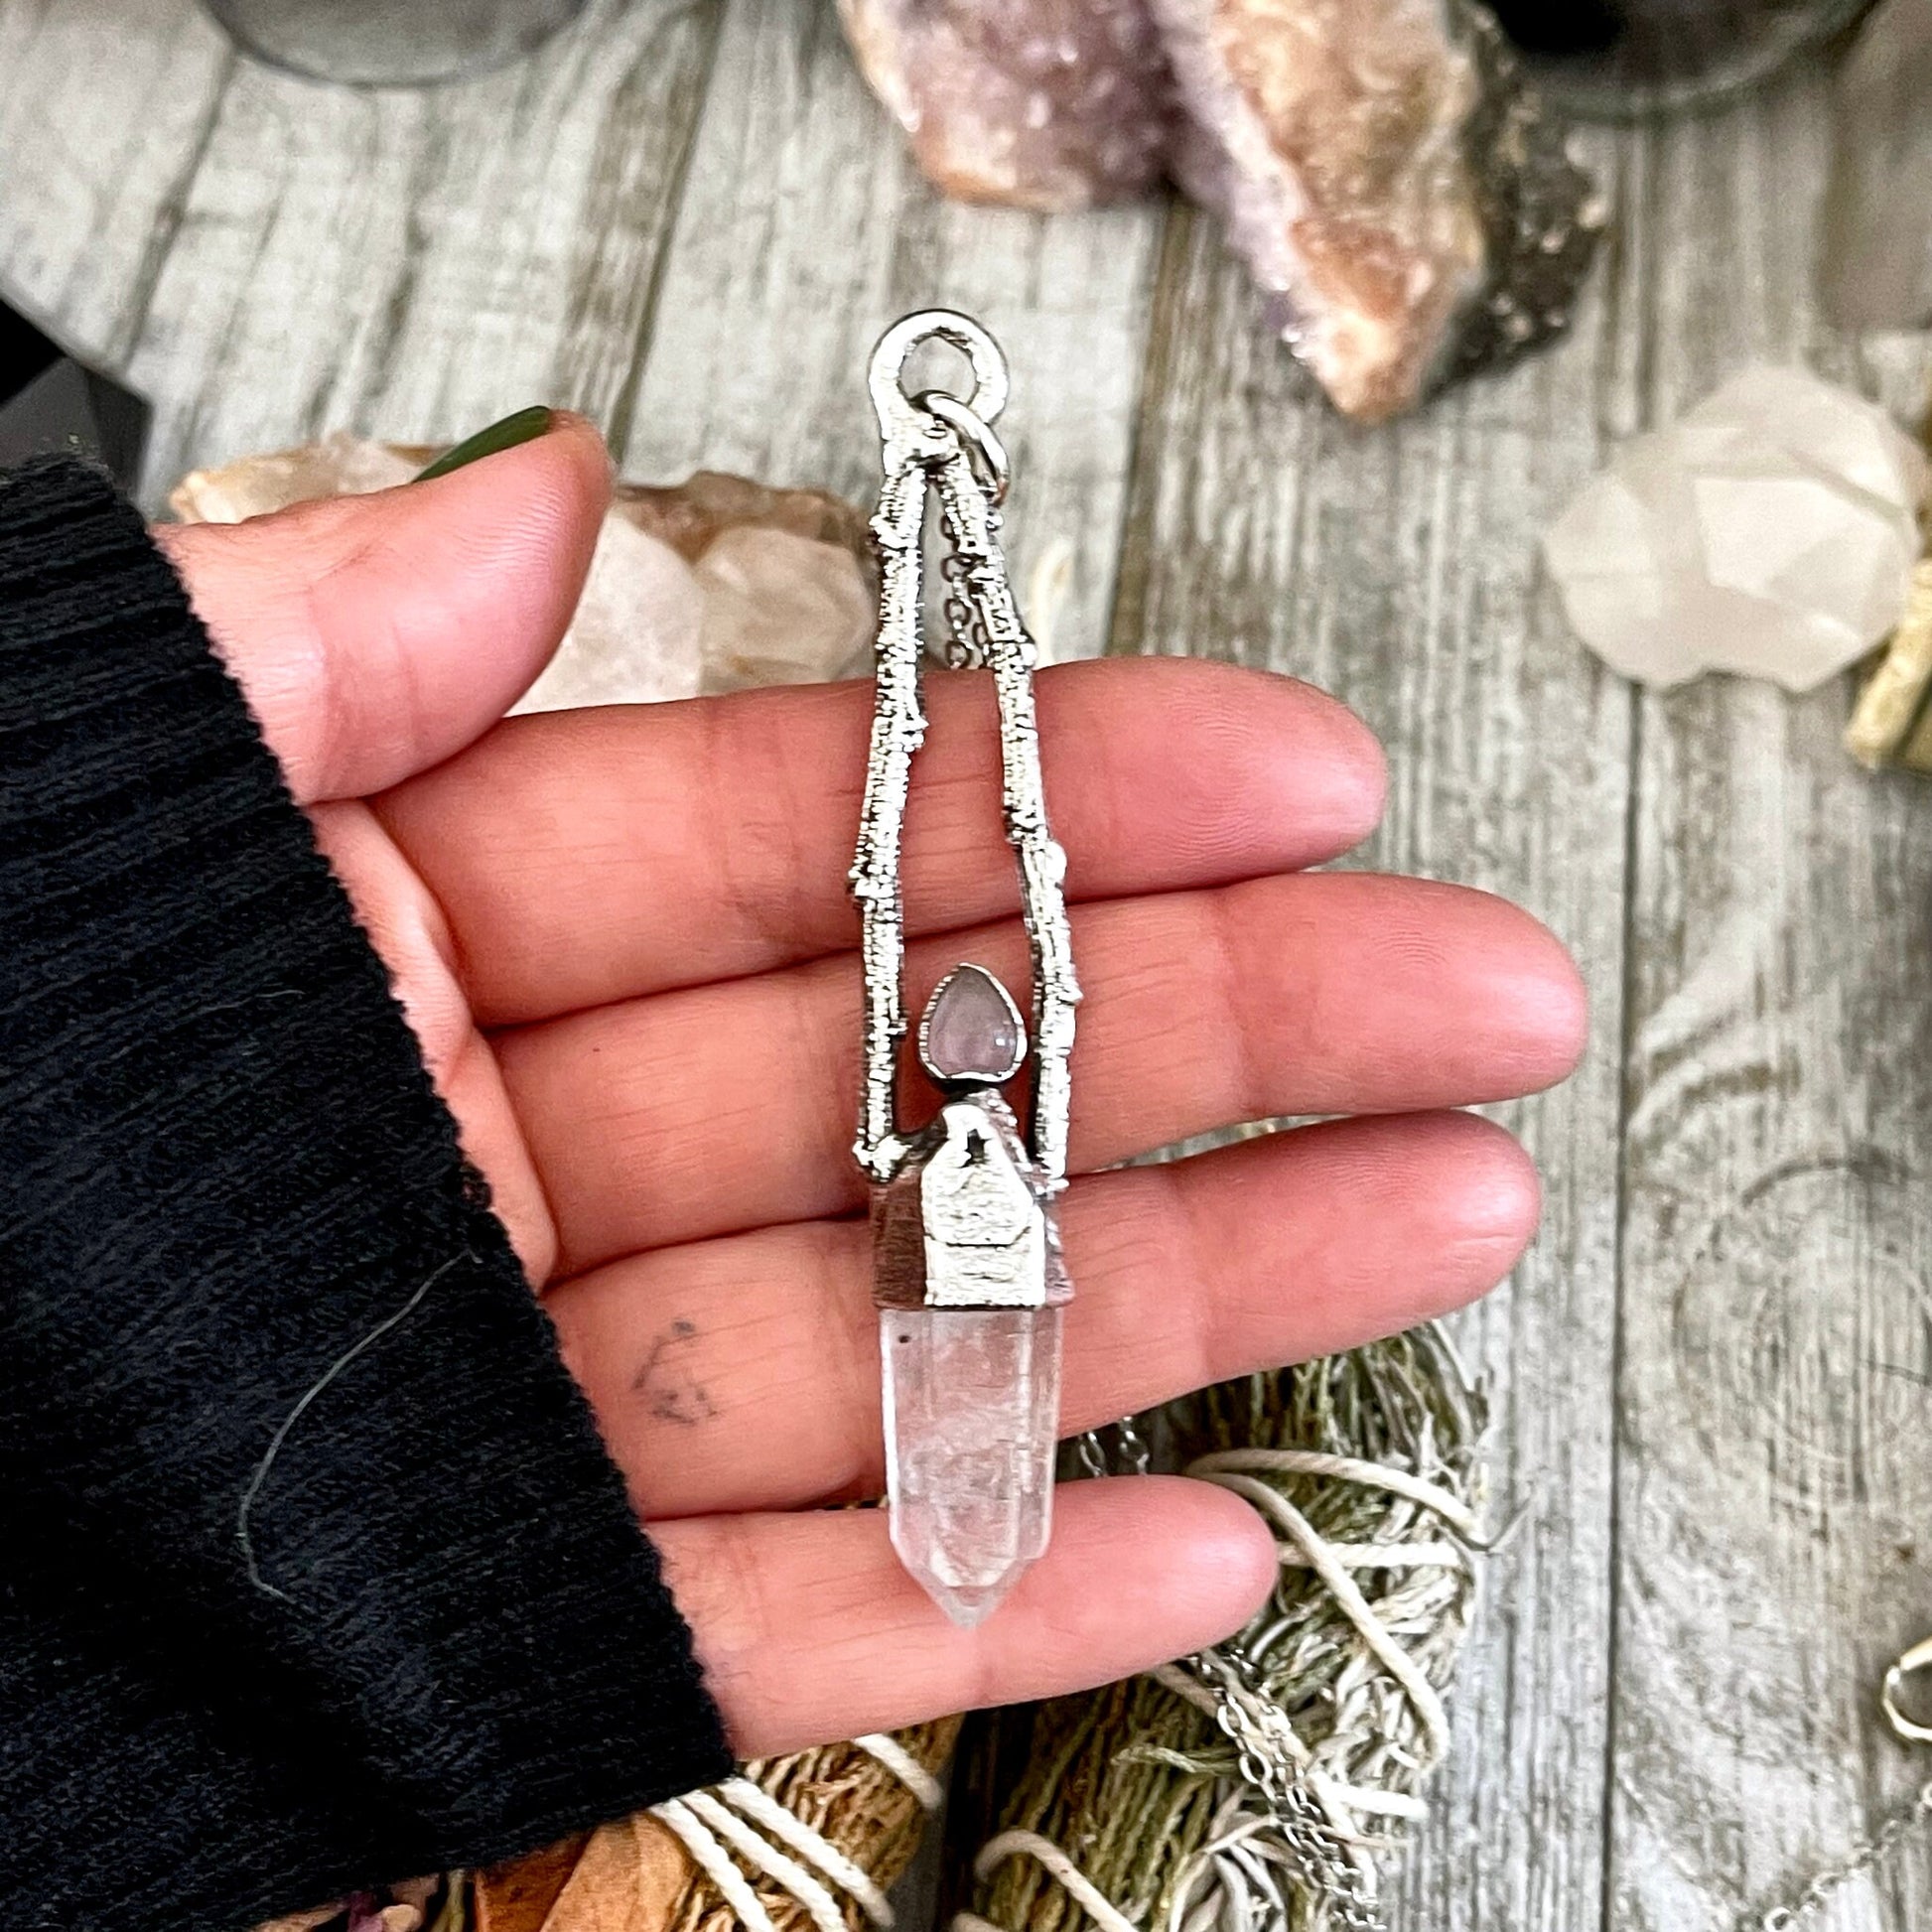 big crystal Necklace, Bohemian Jewelry, Crystal Necklaces, Crystal Pendant, Etsy ID: 1669645543, FOXLARK- NECKLACES, Jewelry, nature inspired, Necklaces, Quartz pendent, Raw Quartz jewelry, Silver Jewelry, Silver Necklace, Silver Stone Jewelry, Statement